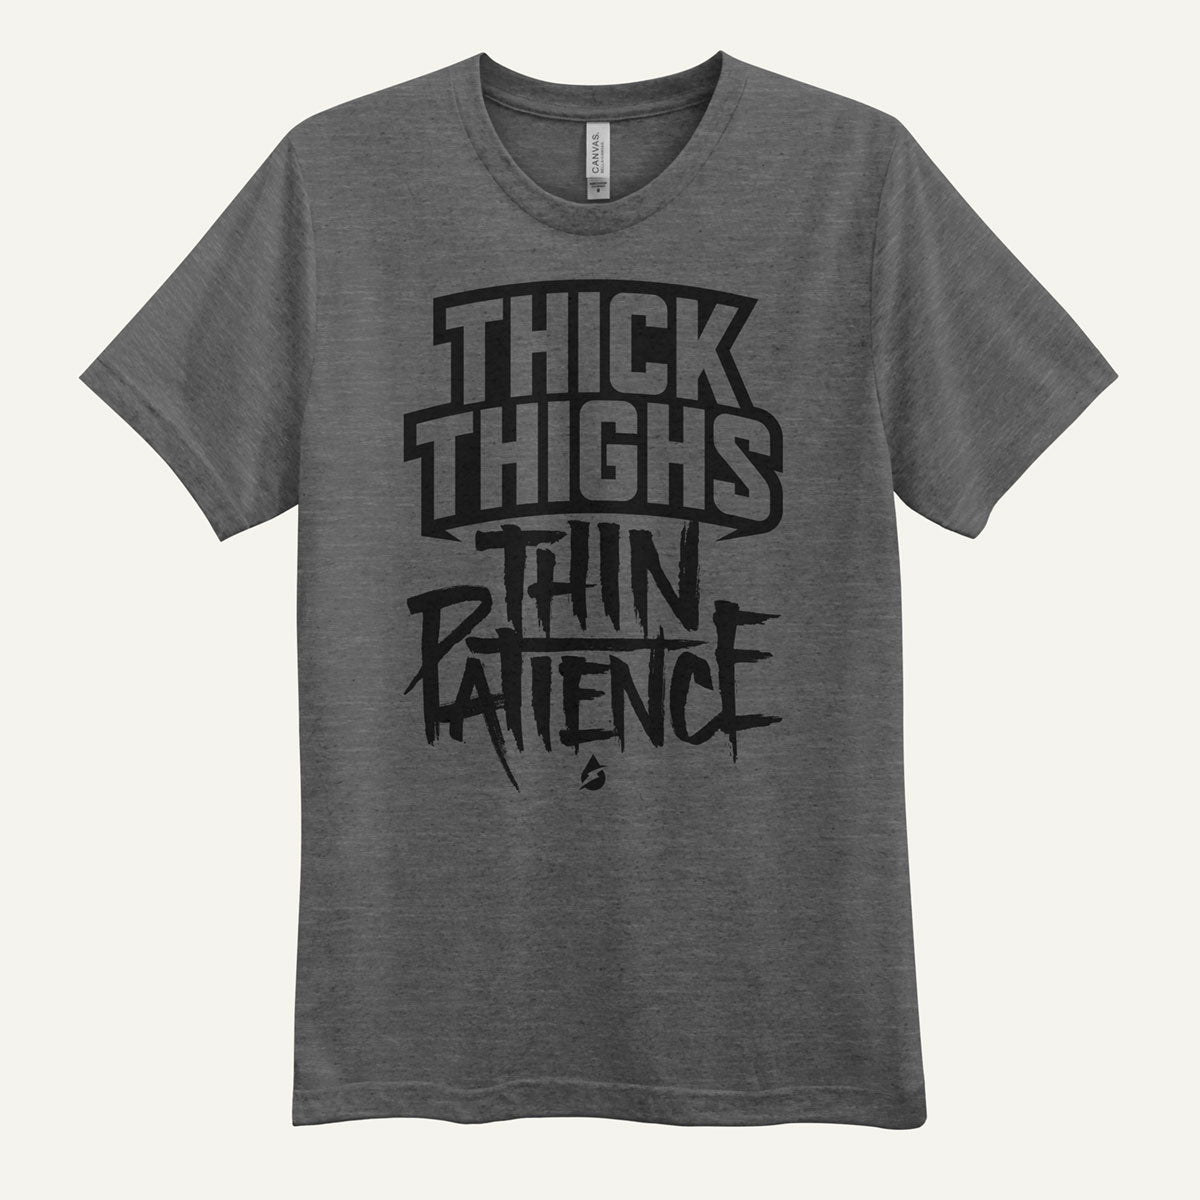 Thick Thighs Thin Patience Men's T-Shirt